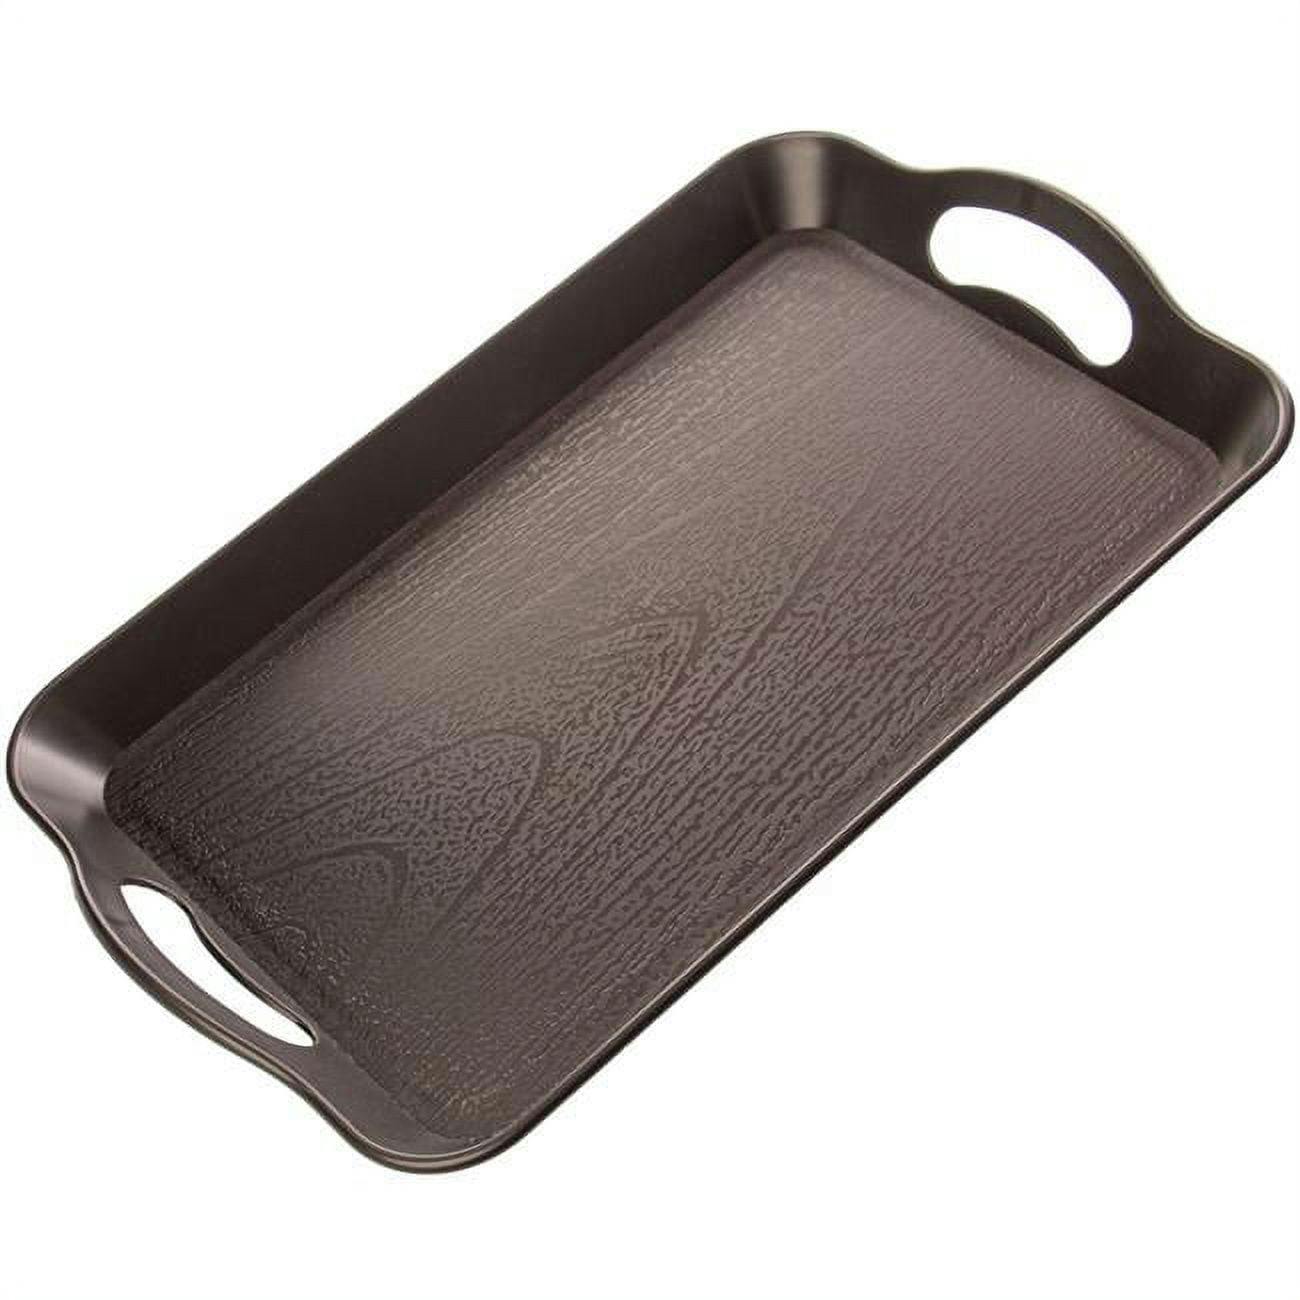 Classic Textured Black Cafeteria Tray with Handles - Small